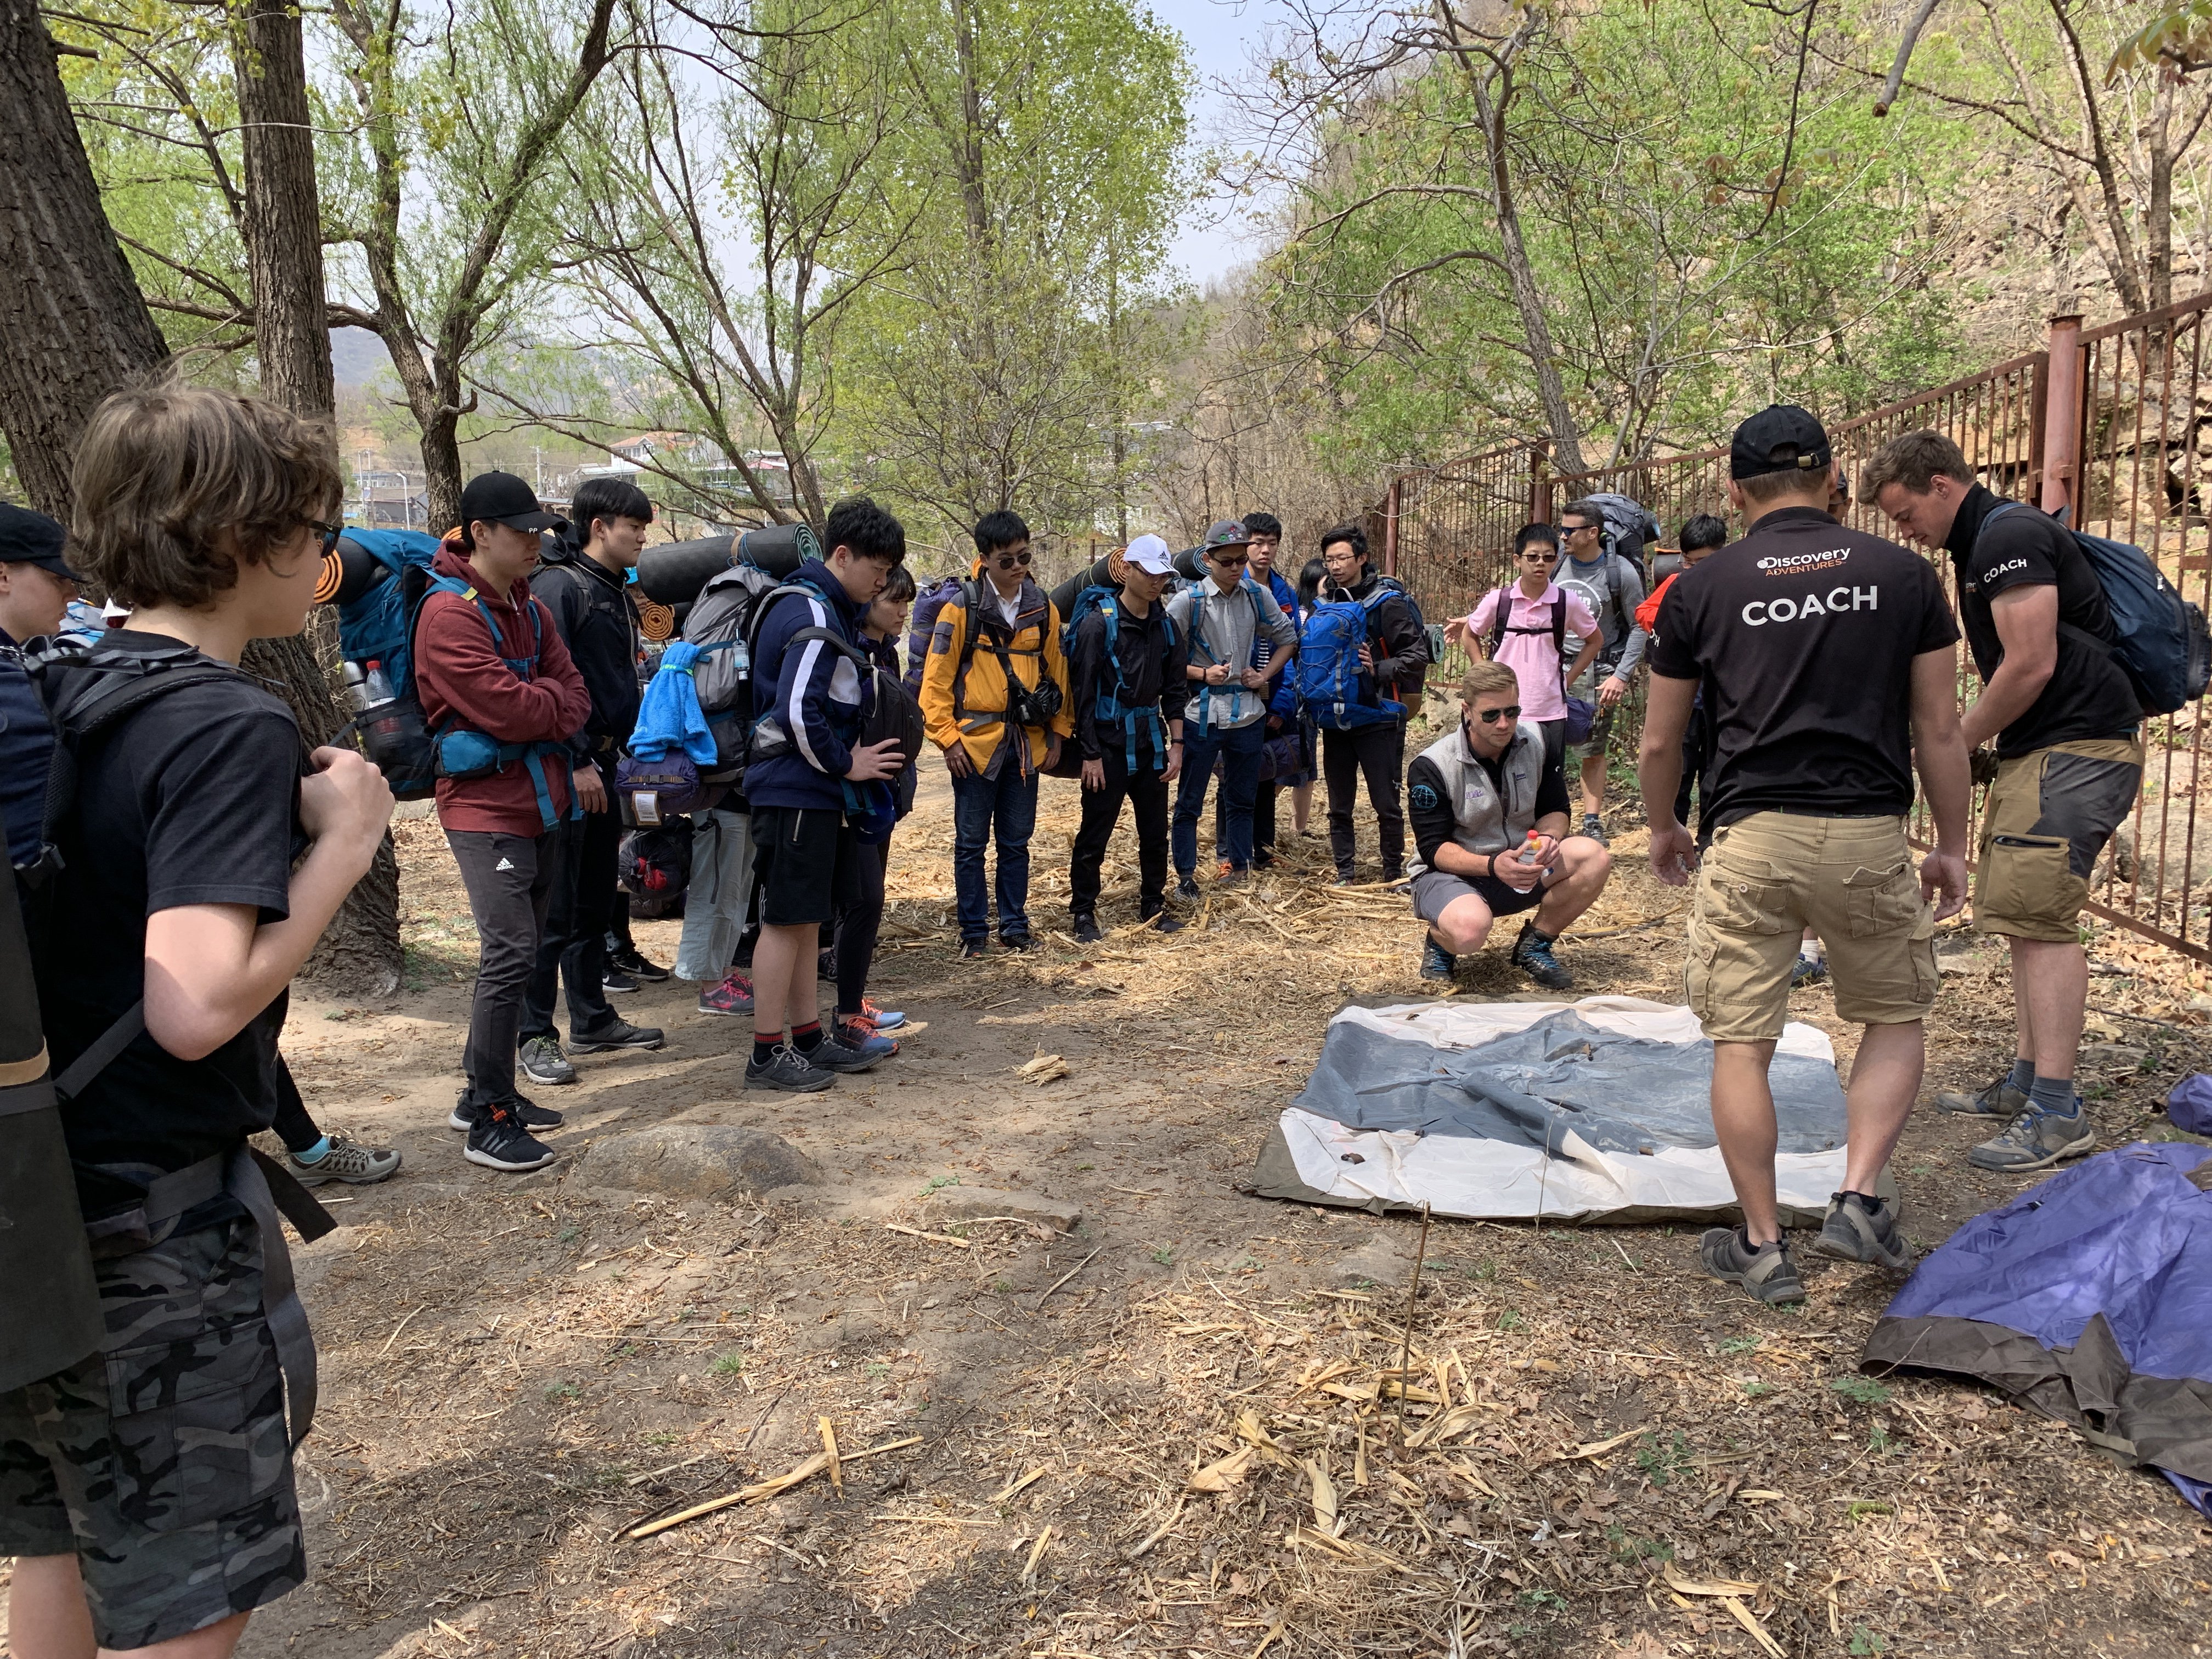 Students being shown how to set up camp